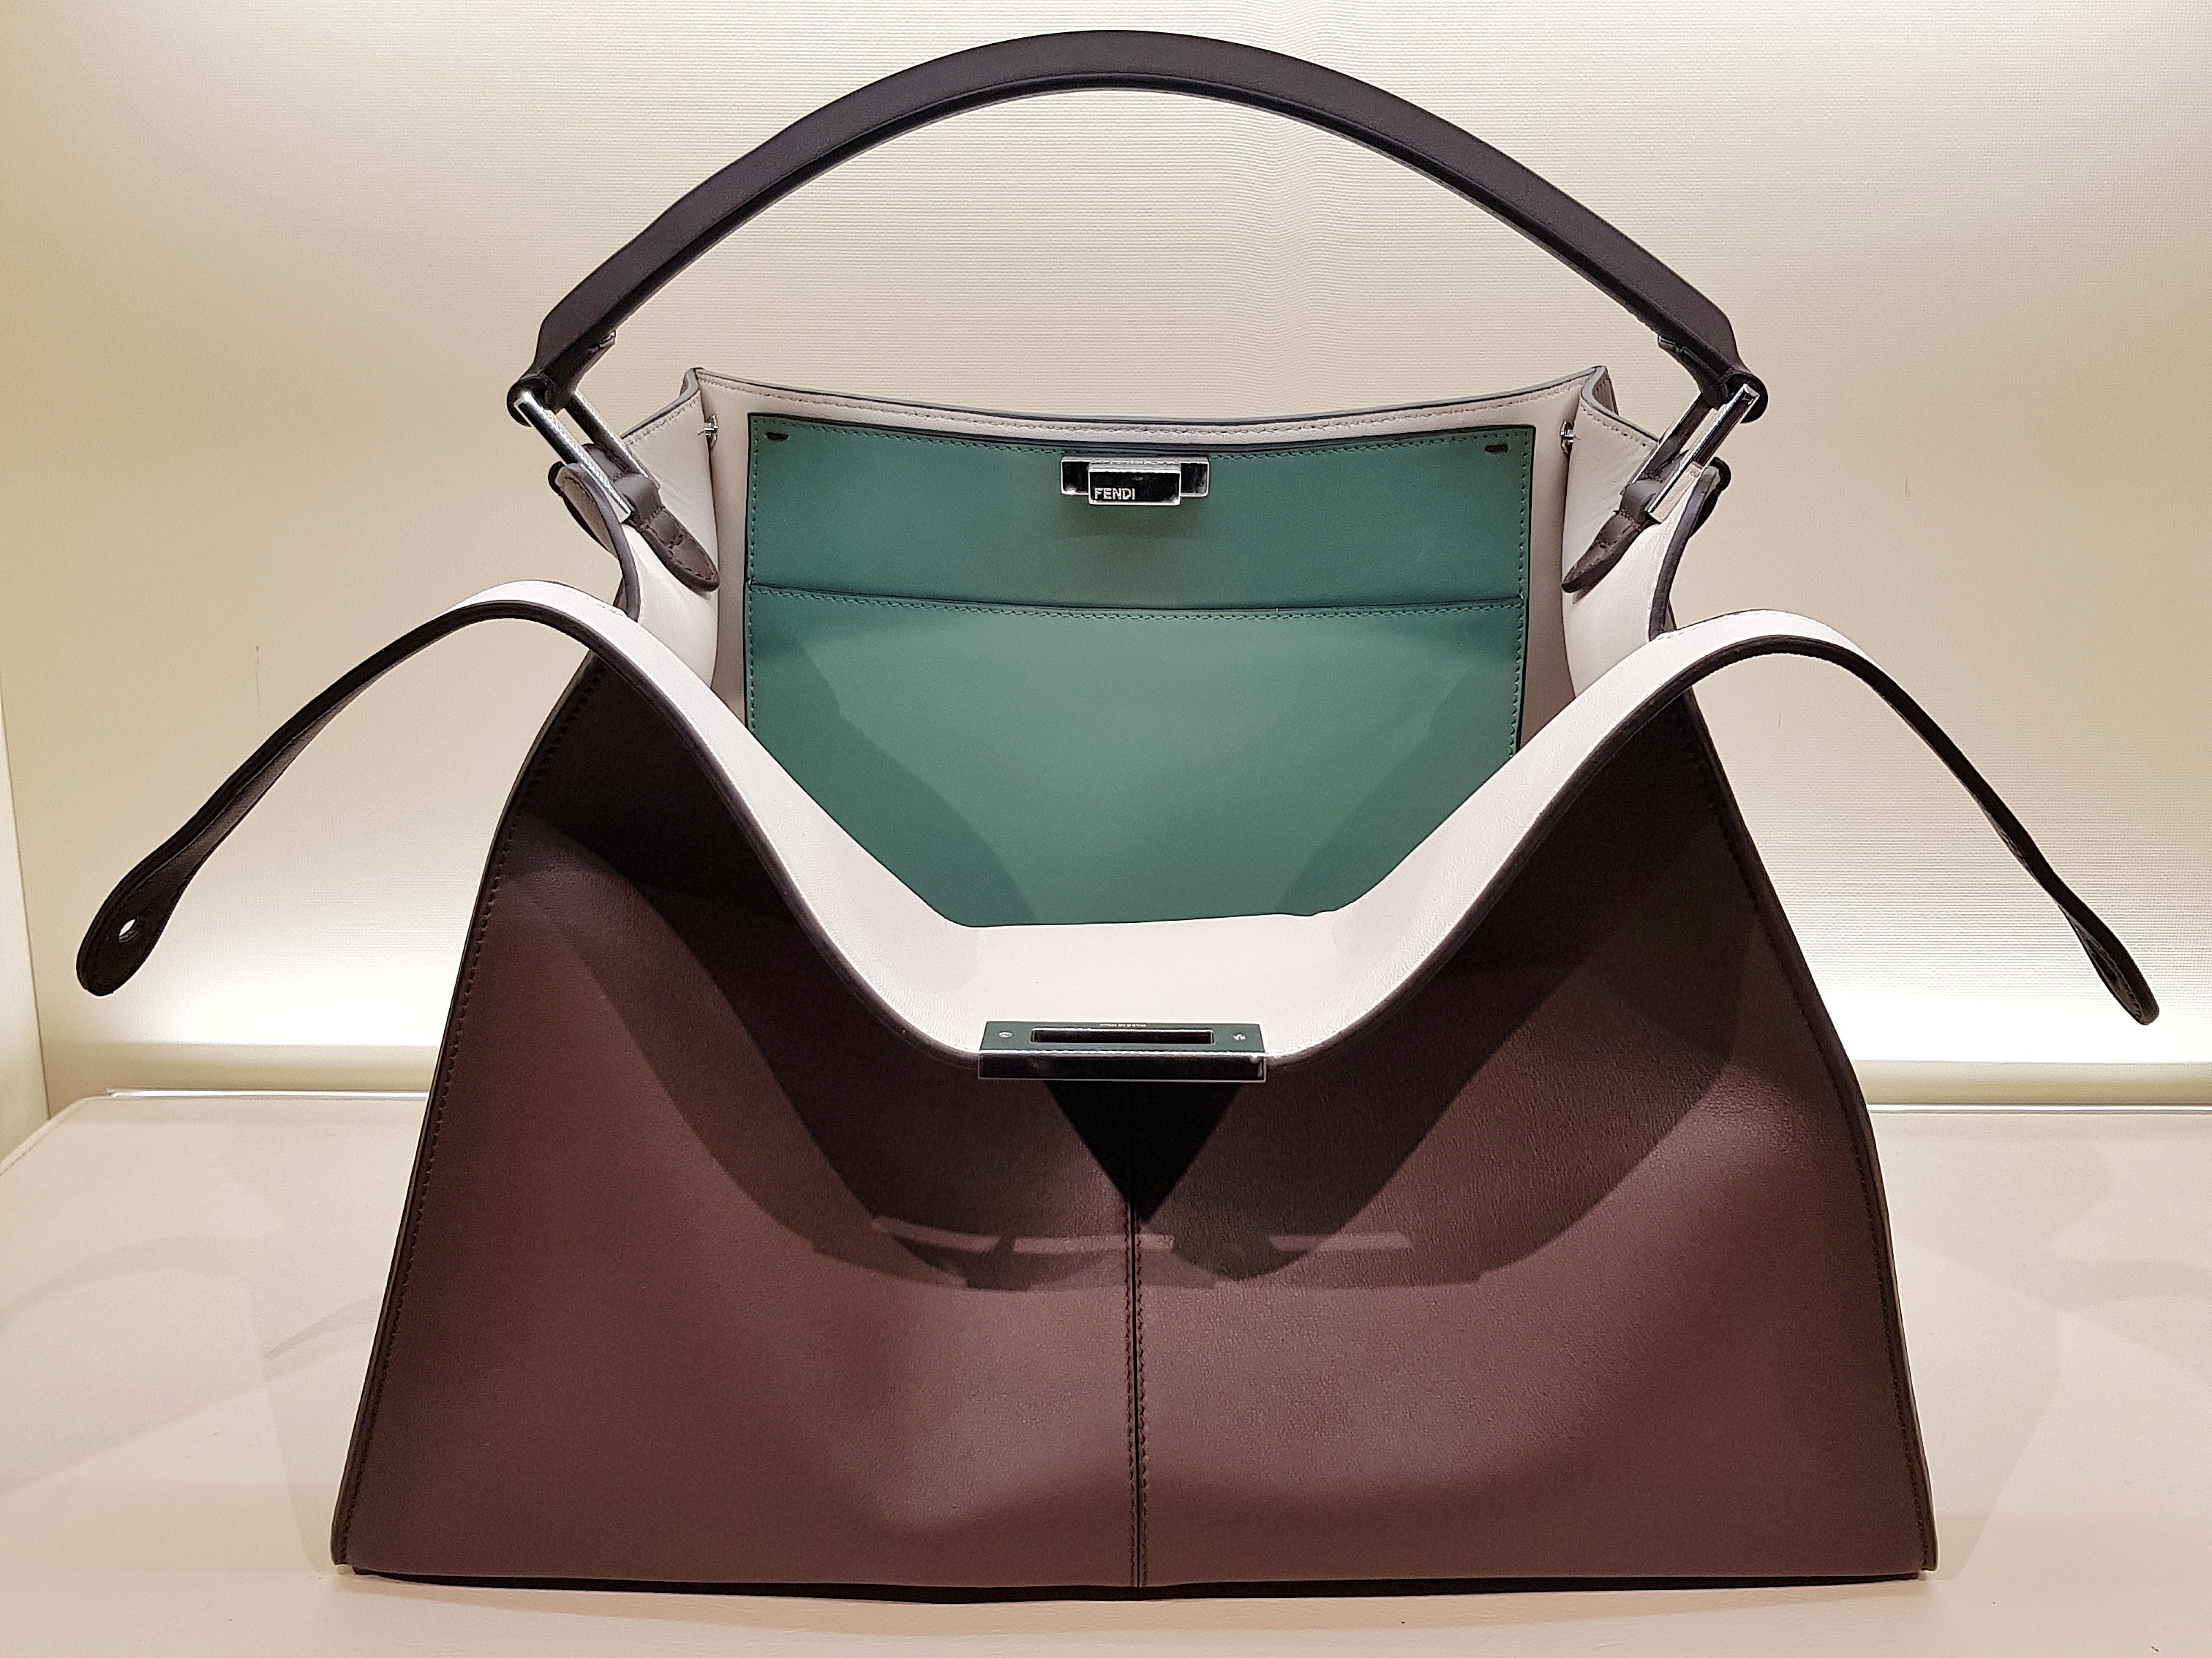 Bag Review: Fendi's New Bags for Fall 